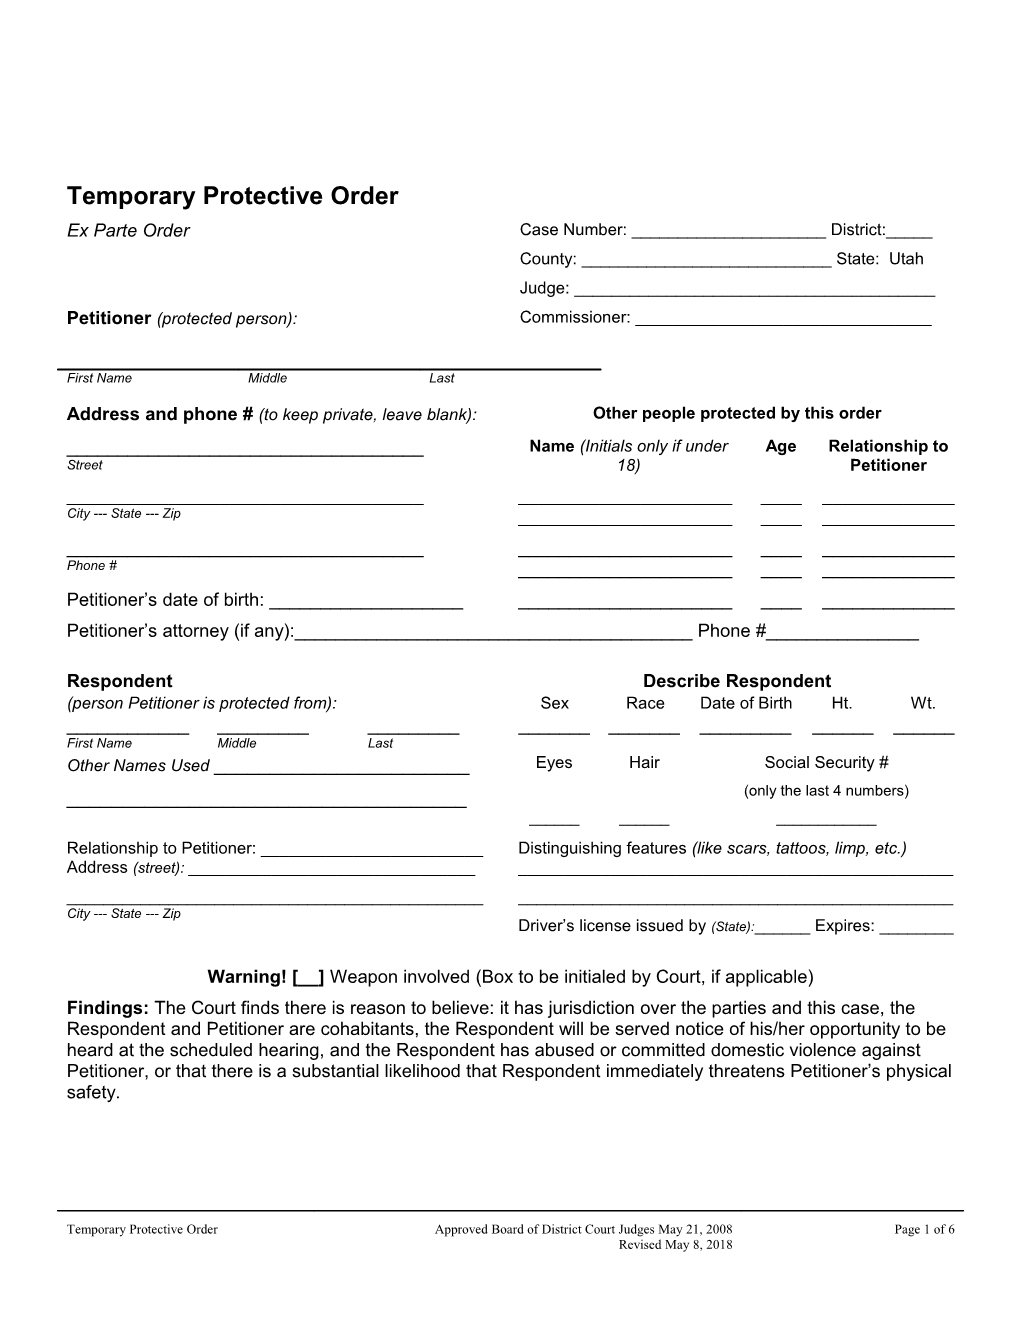 Temporary Protective Order - Ex Parte Order